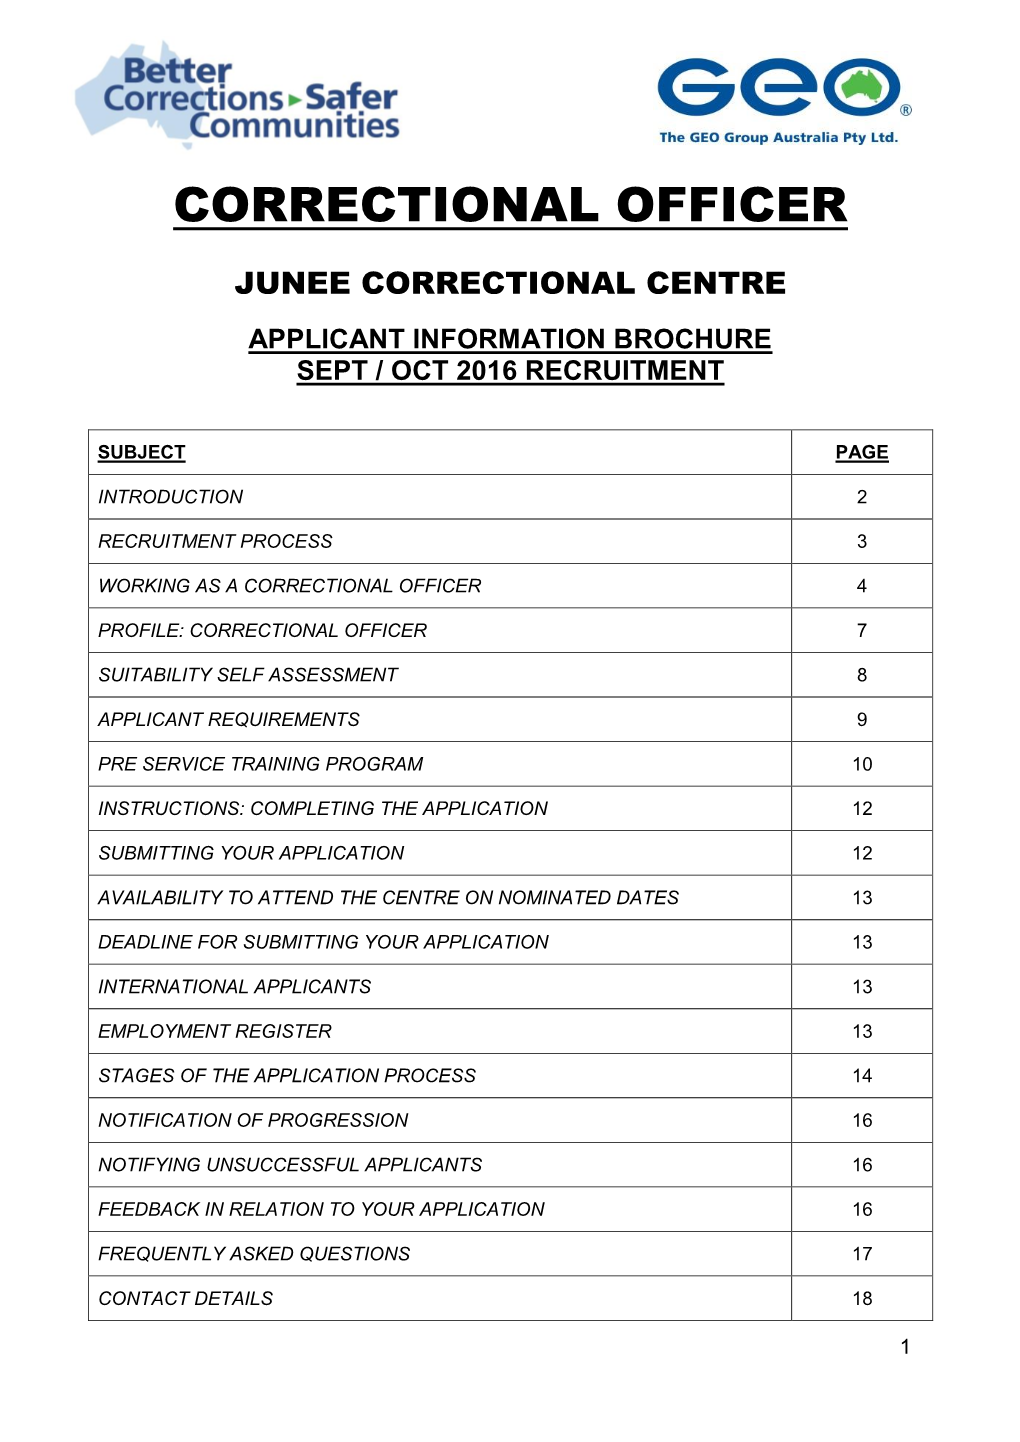 The GEO Group at Junee Correctional Centre